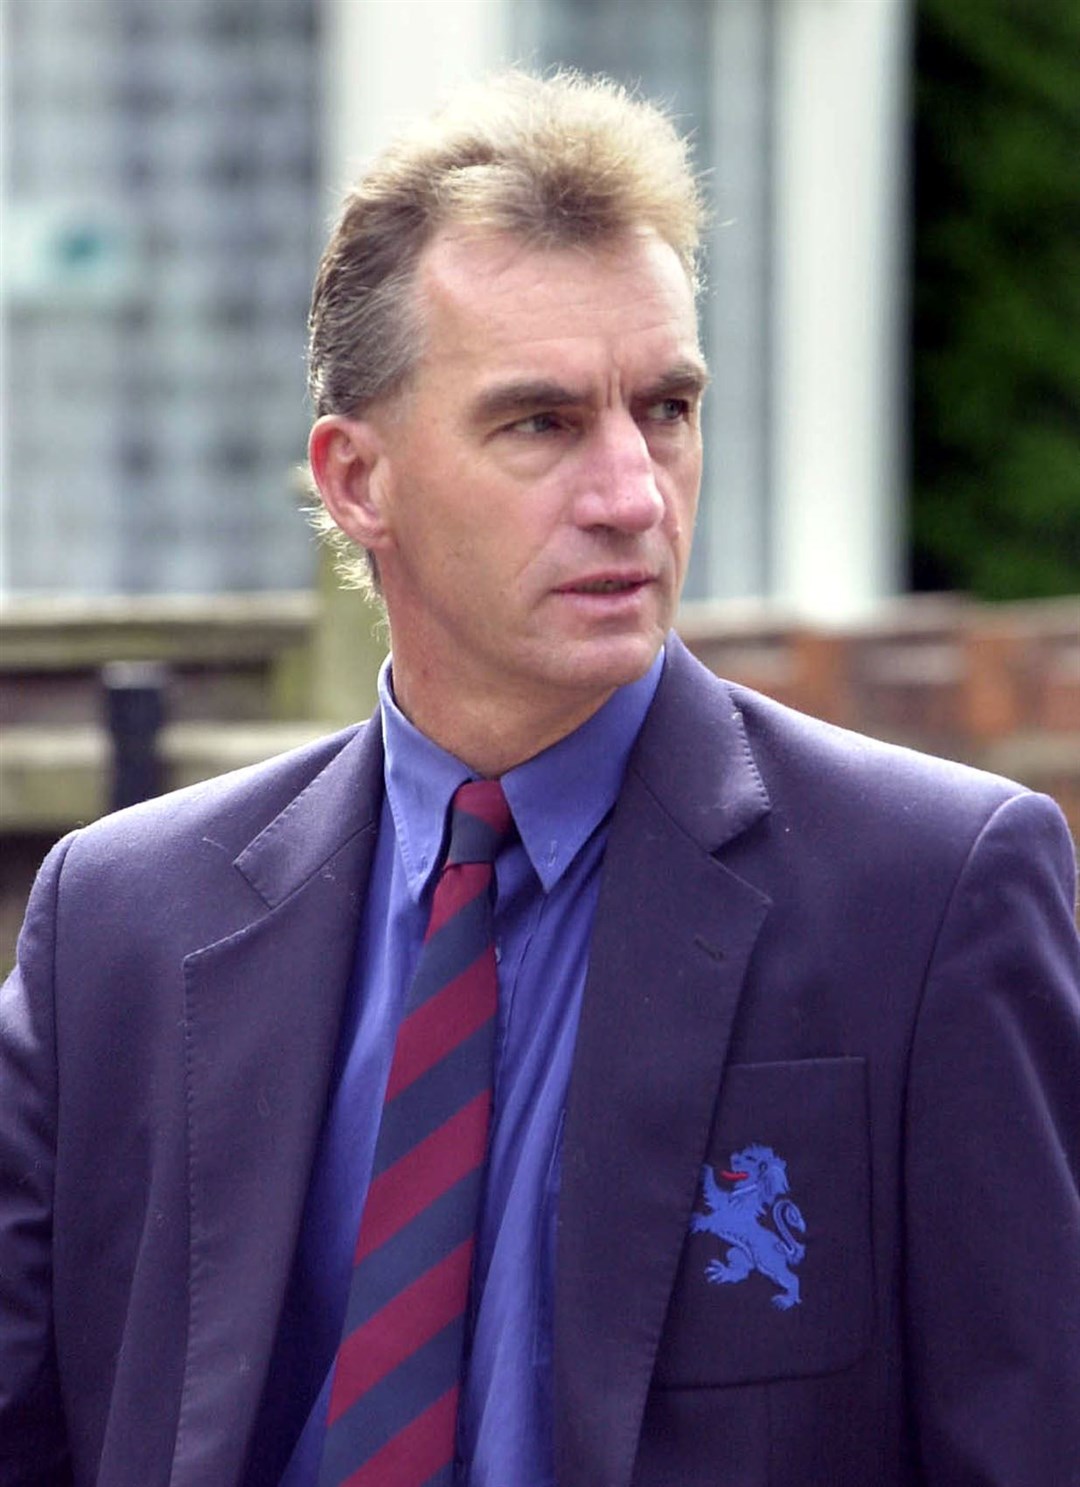 Former Somerset cricket captain Peter Roebuck arrives at Taunton Magistrates’ Court in 2001 (Barry Batchelor/PA)